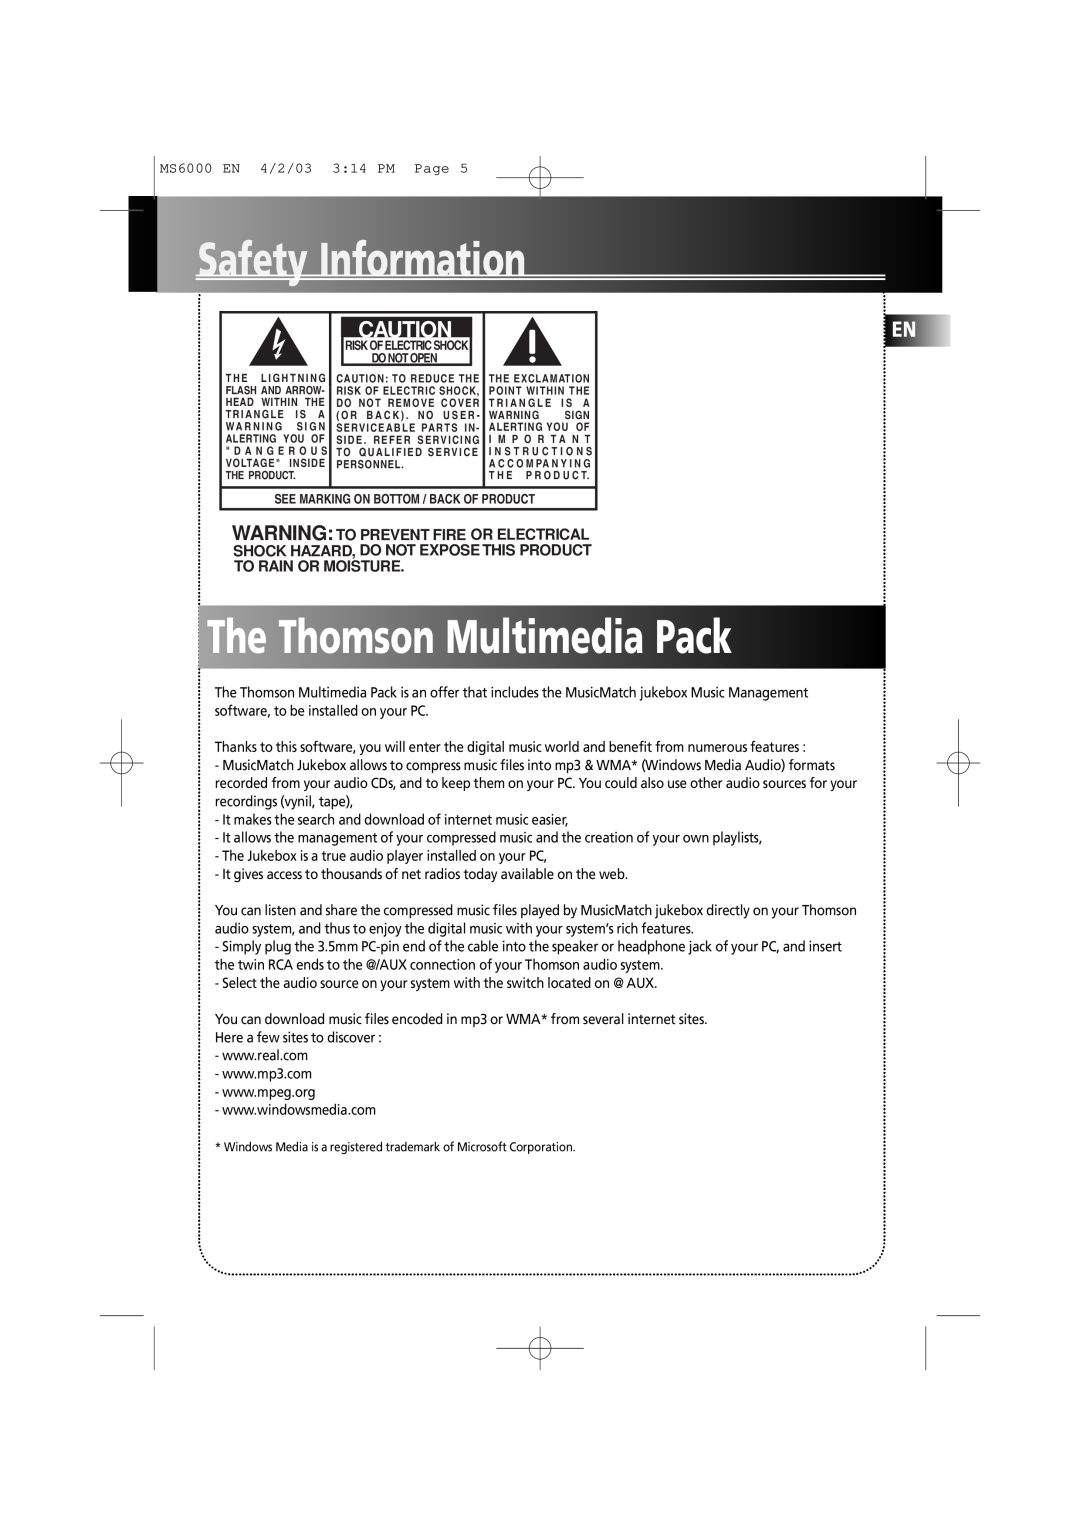 Technicolor - Thomson MS6000 manual The Thomson Multimedia Pack, Safety Information, Warning To Prevent Fire Or Electrical 